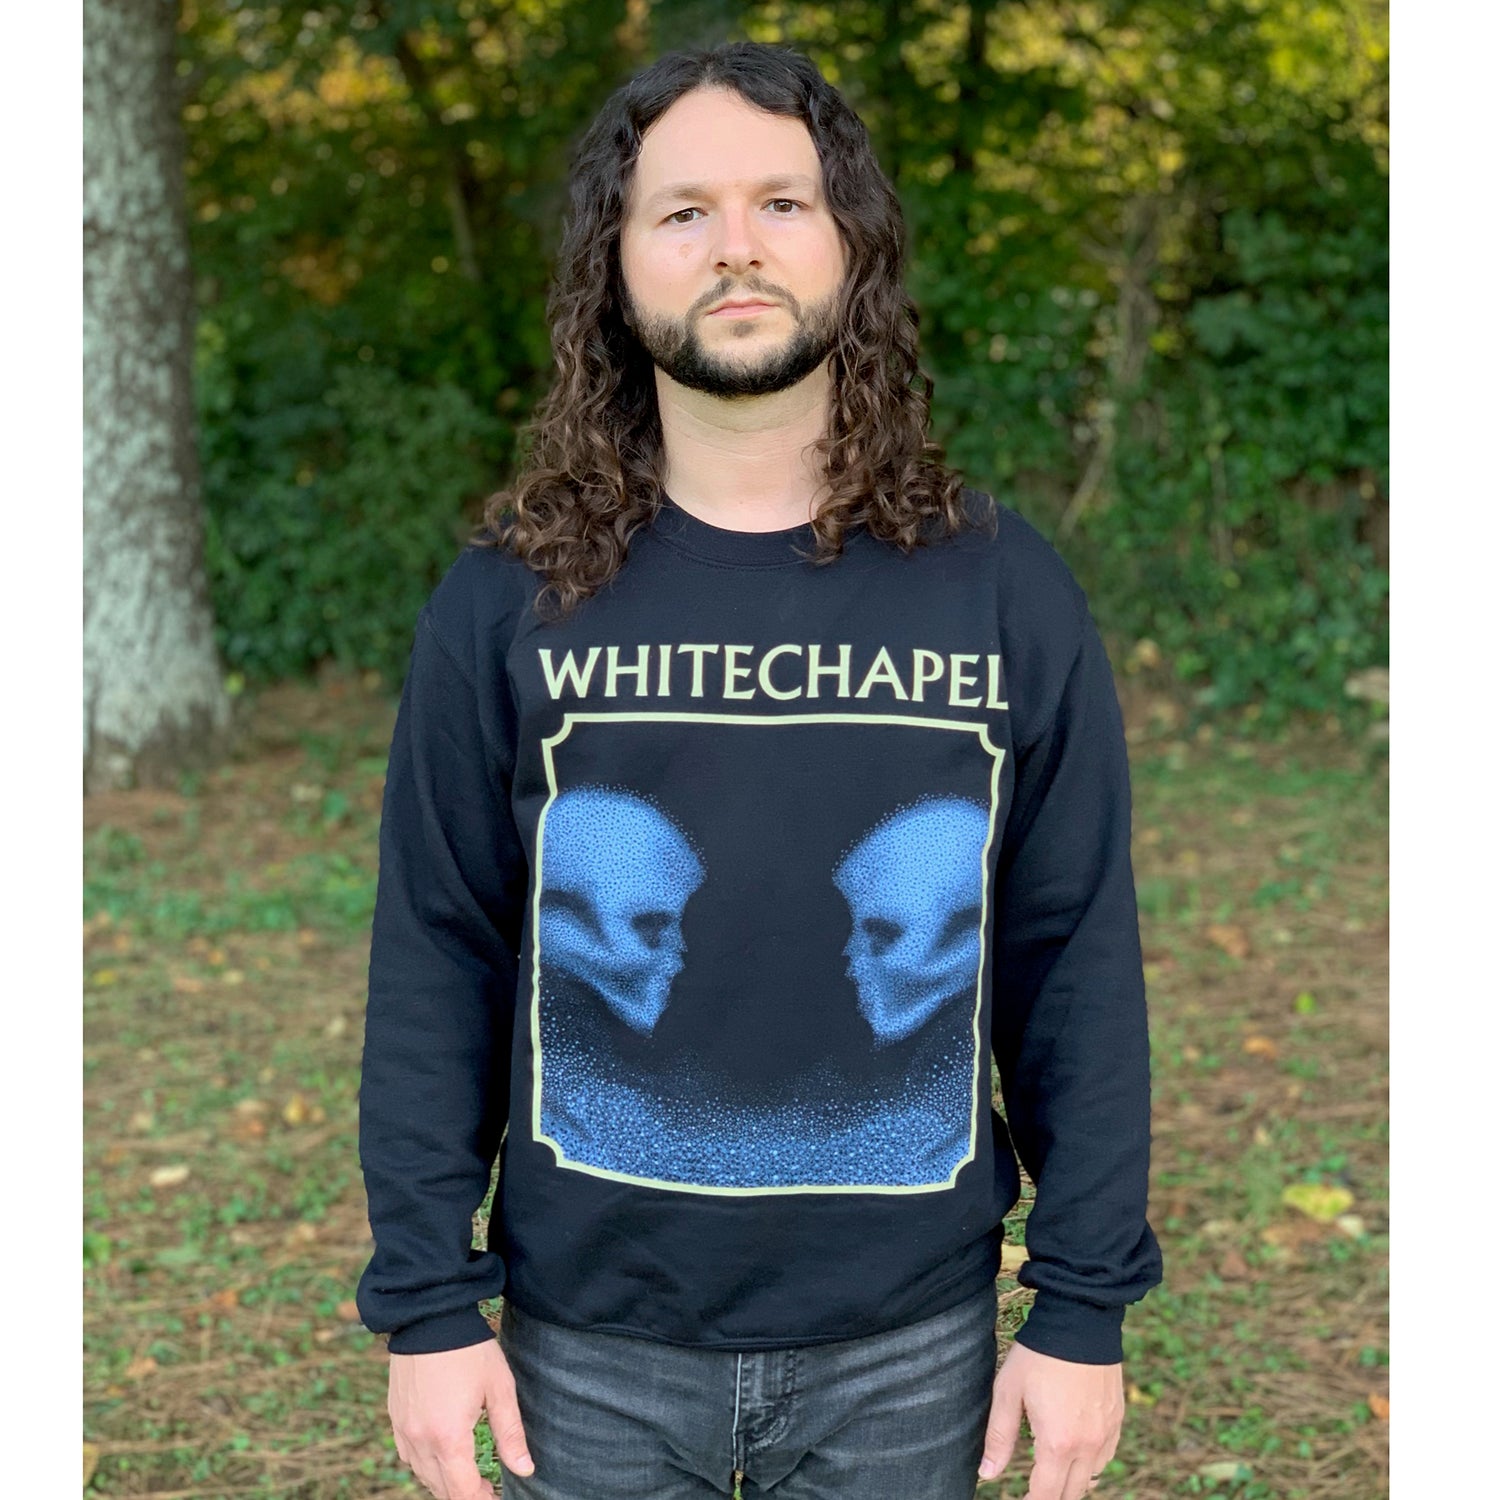 Image of a man with medium length curly brunette hair wearing a black crewneck and dark blue jeans standing in a forest. The crewneck features the heads of two skulls, looking at one another. This is in blue. They are made up of blue and black static- and the static is beneath them too. This is outlined in an off white square. Above the square in an off white text reads "whitechapel".